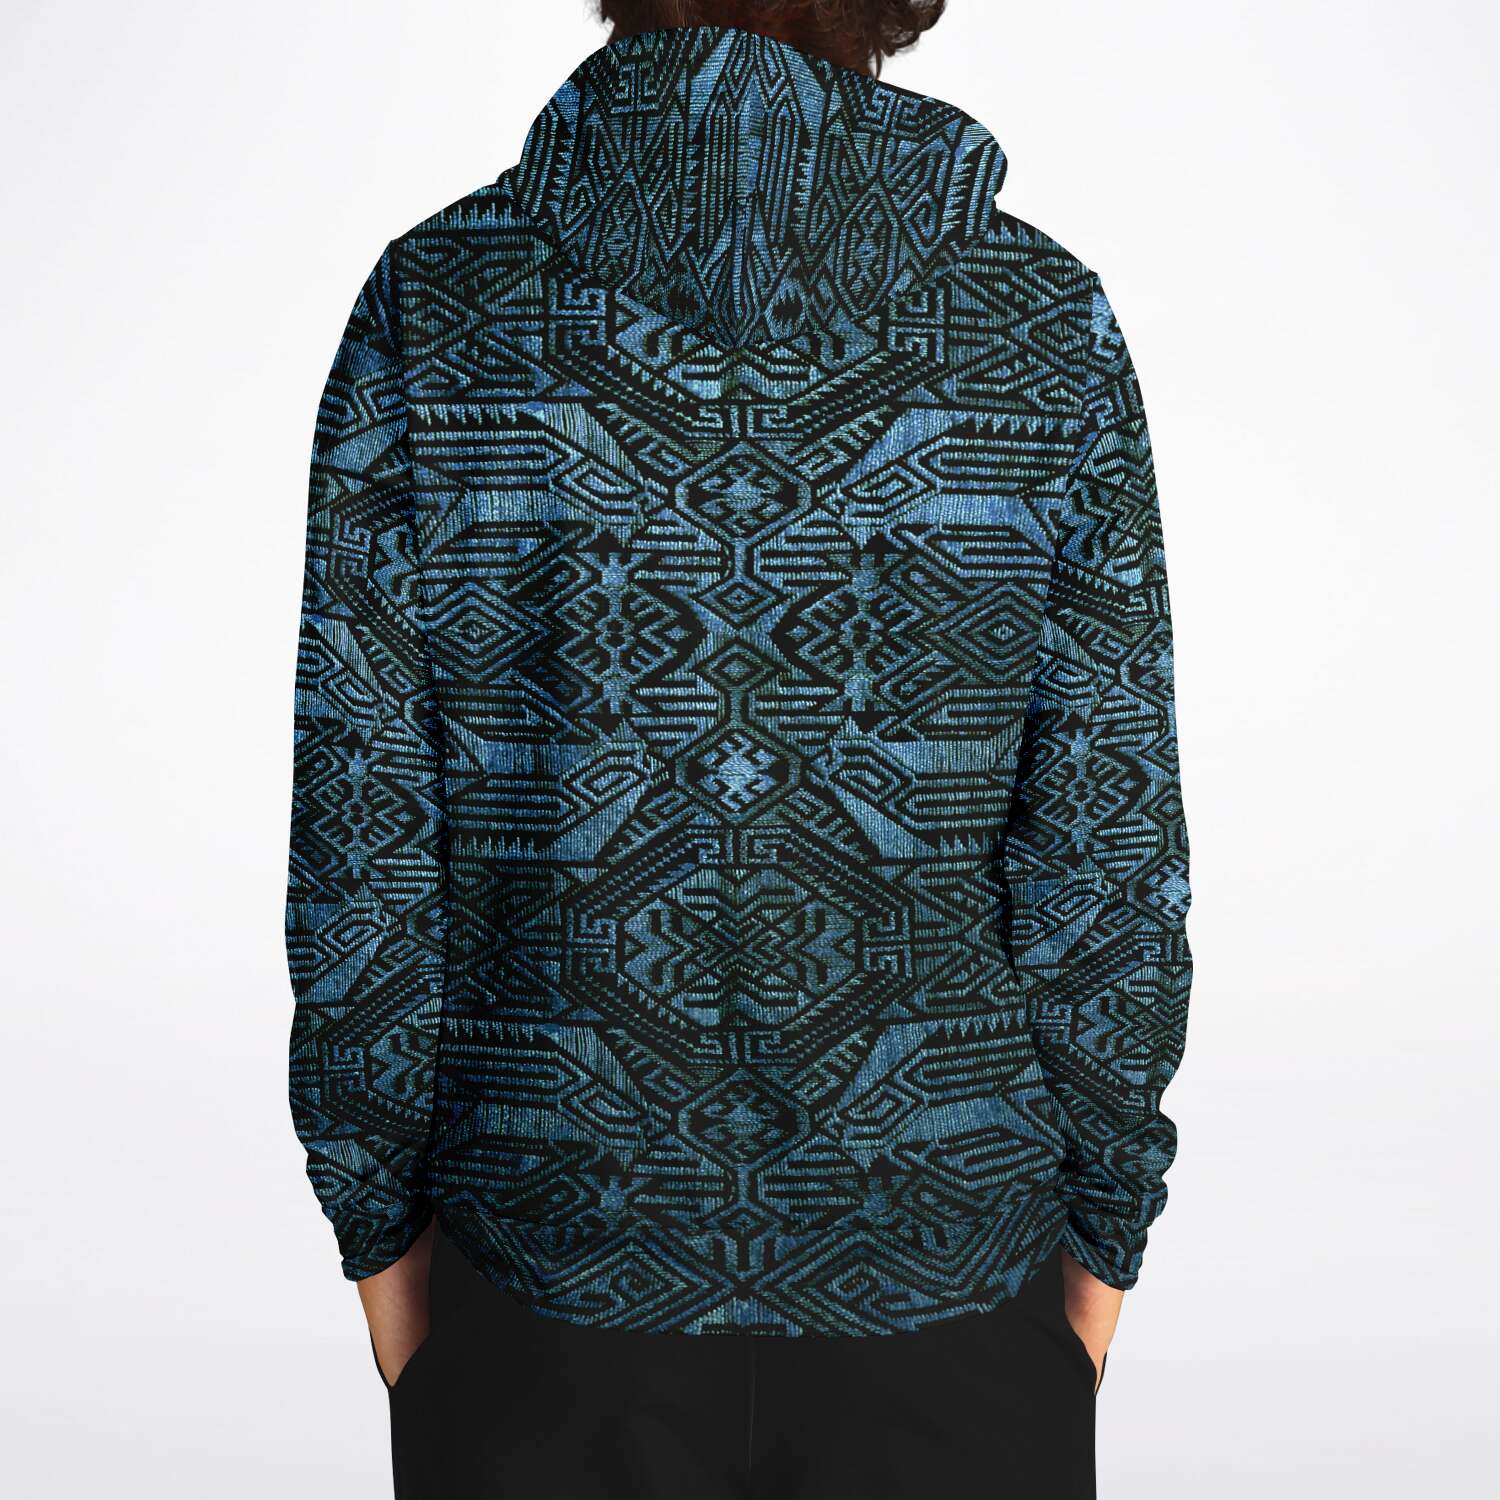 Fashion Hoodie - AOP Modern Oceanic Ikat Pullover Hoodie, Inspired by Indonesian Textiles, Laos Culture, Hmong Sweaters, Thailand, and India